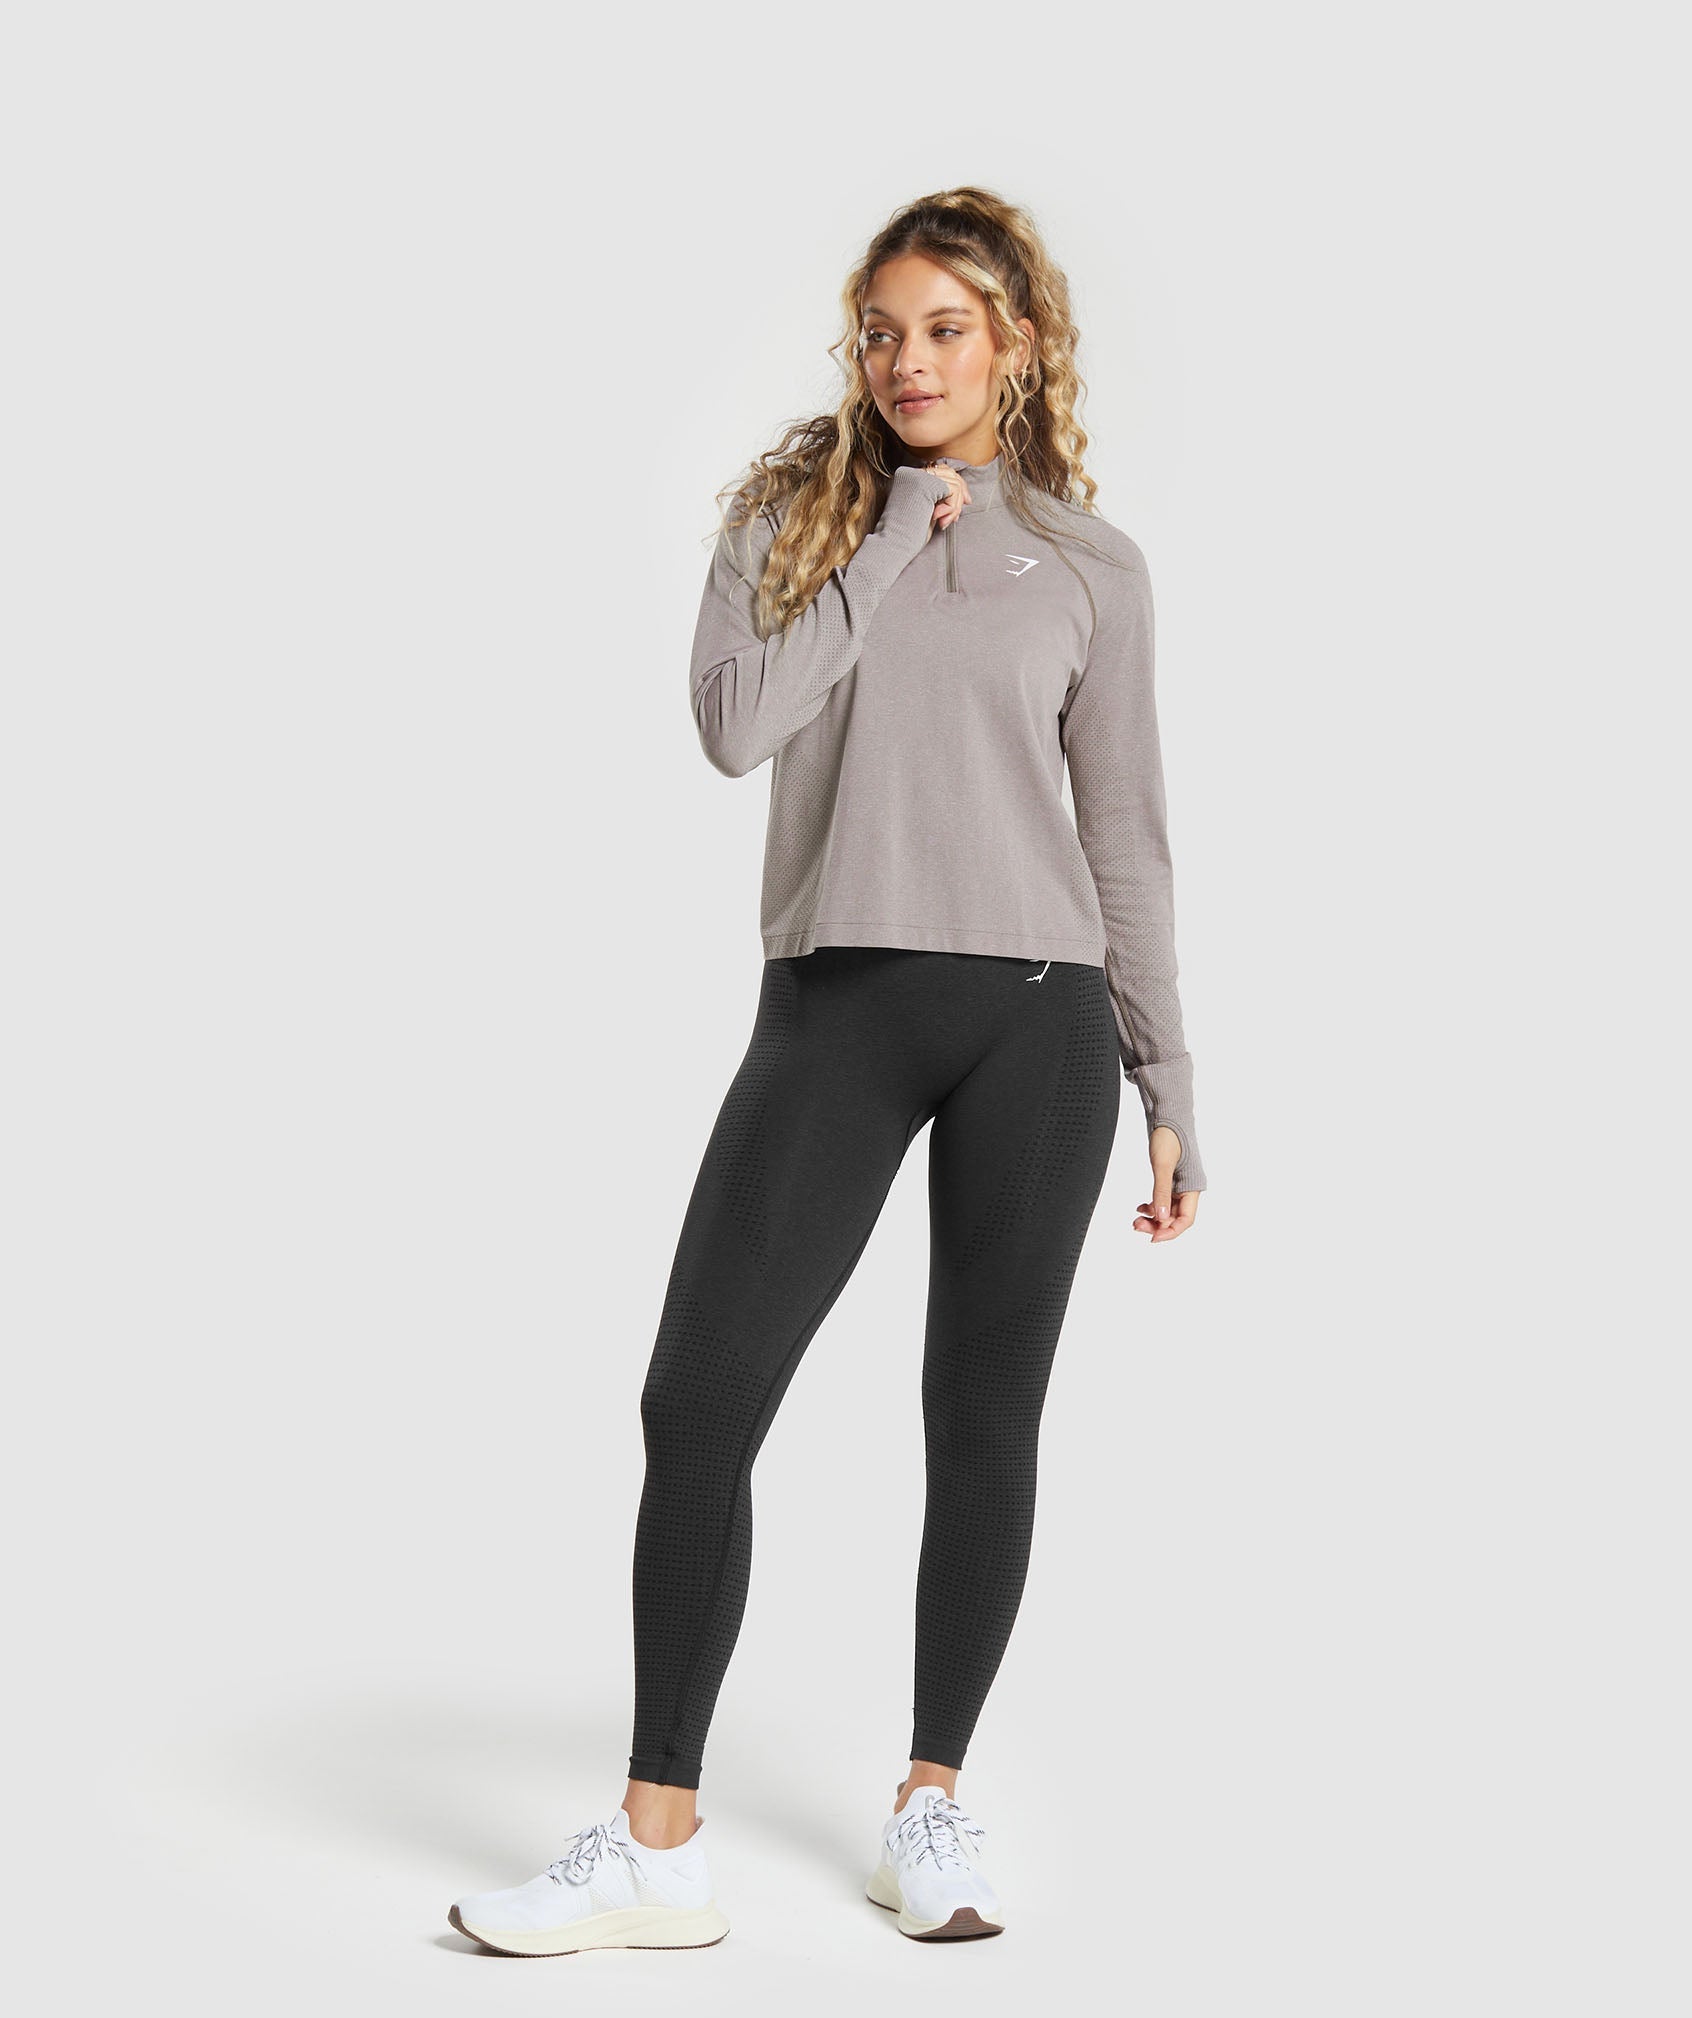 Vital Seamless 2.0 1/4 Zip in Warm Taupe Marl - view 4